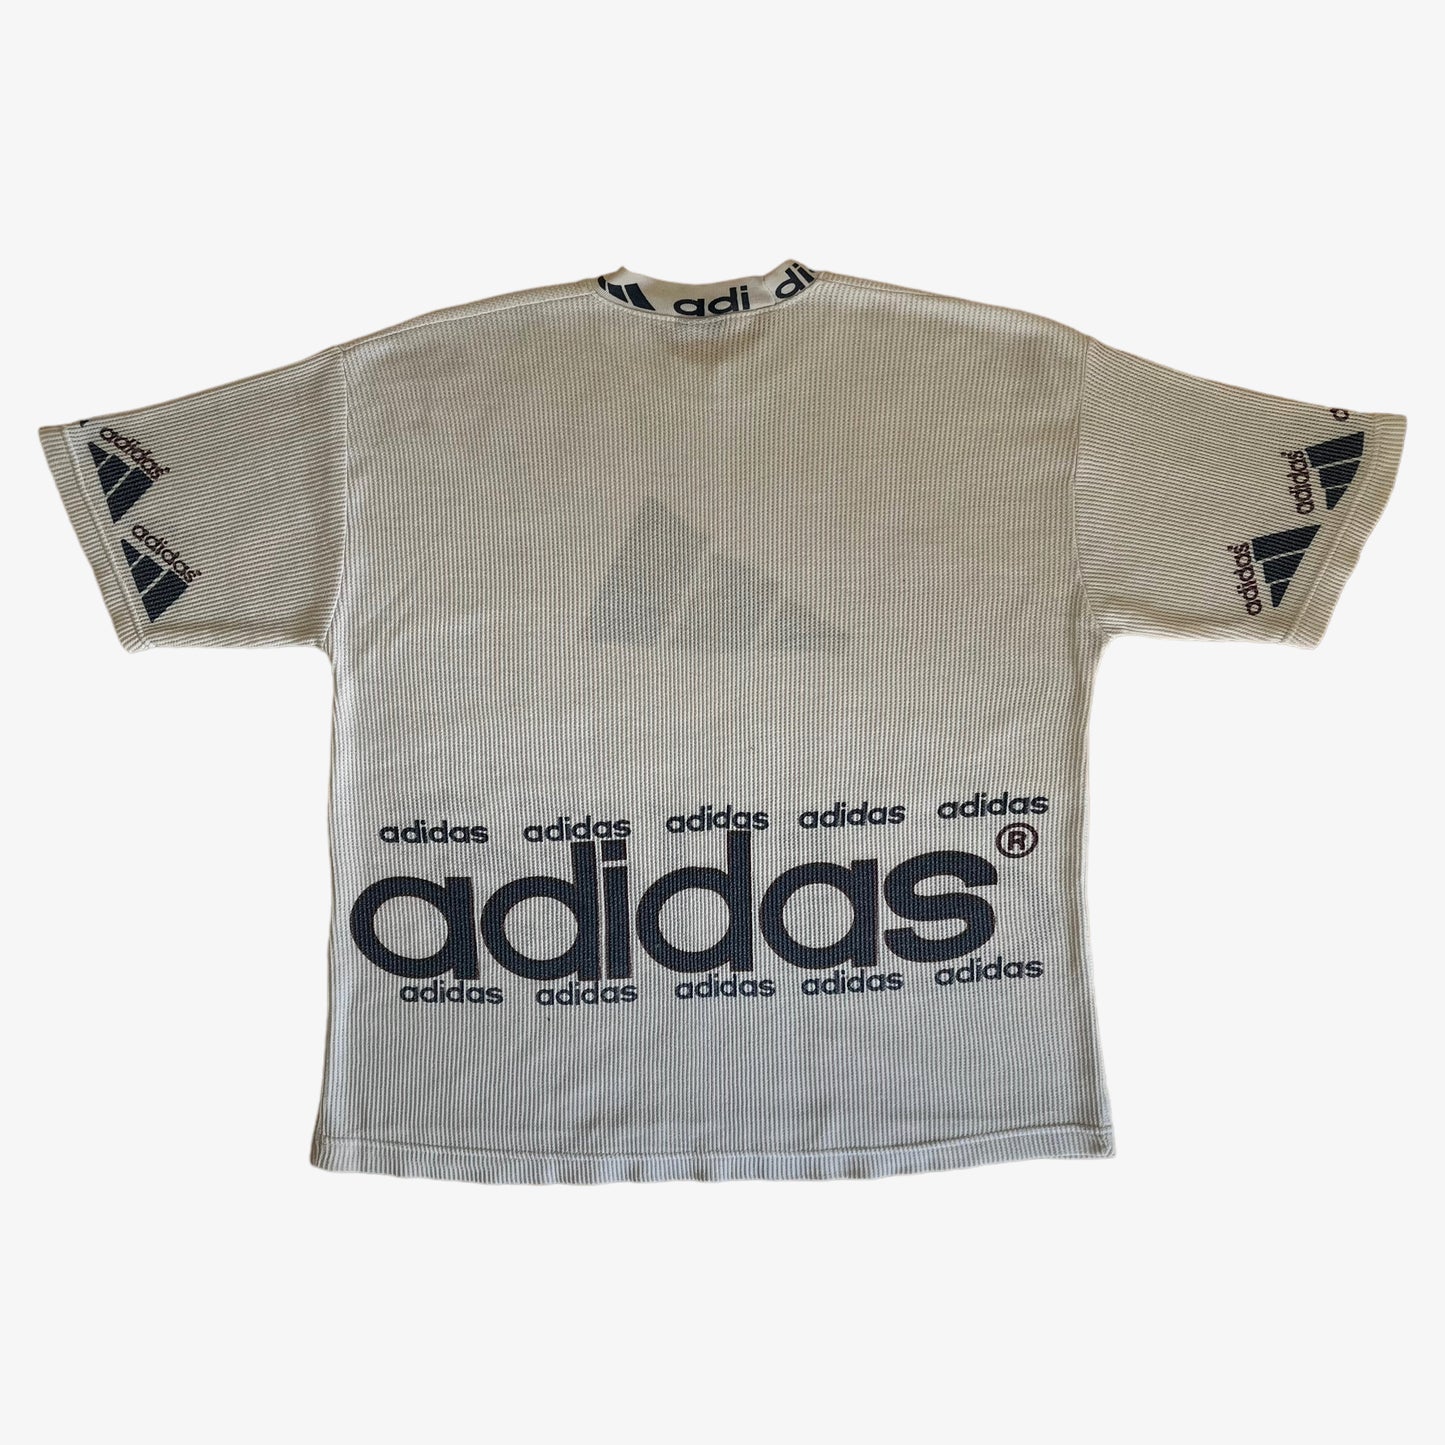 Vintage 90s Adidas All Over Print Spell Out Top Back - Casspios Dream